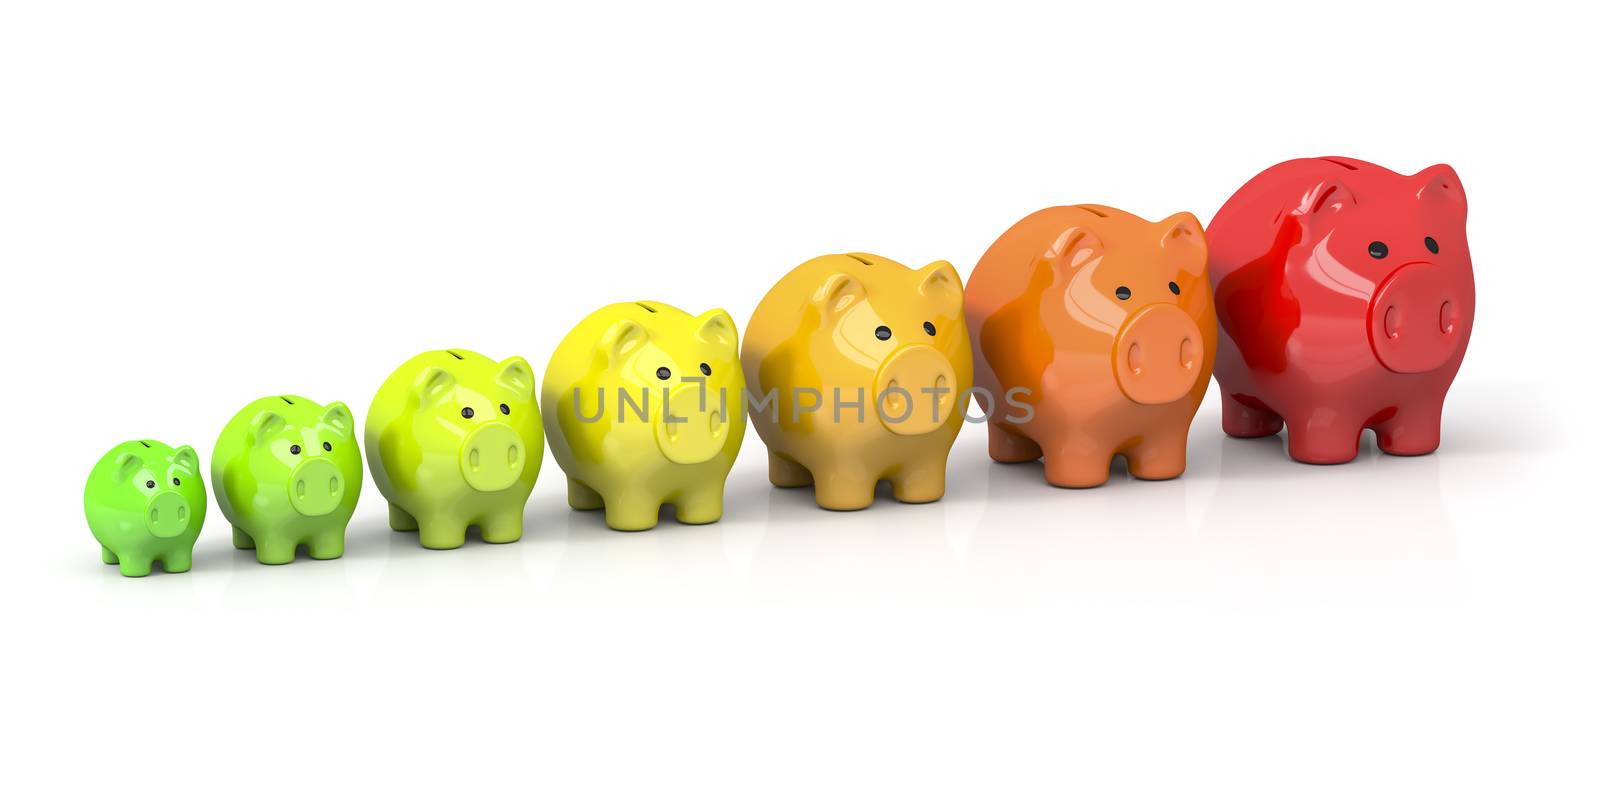 some piggy banks in different colors for energy efficiency by magann